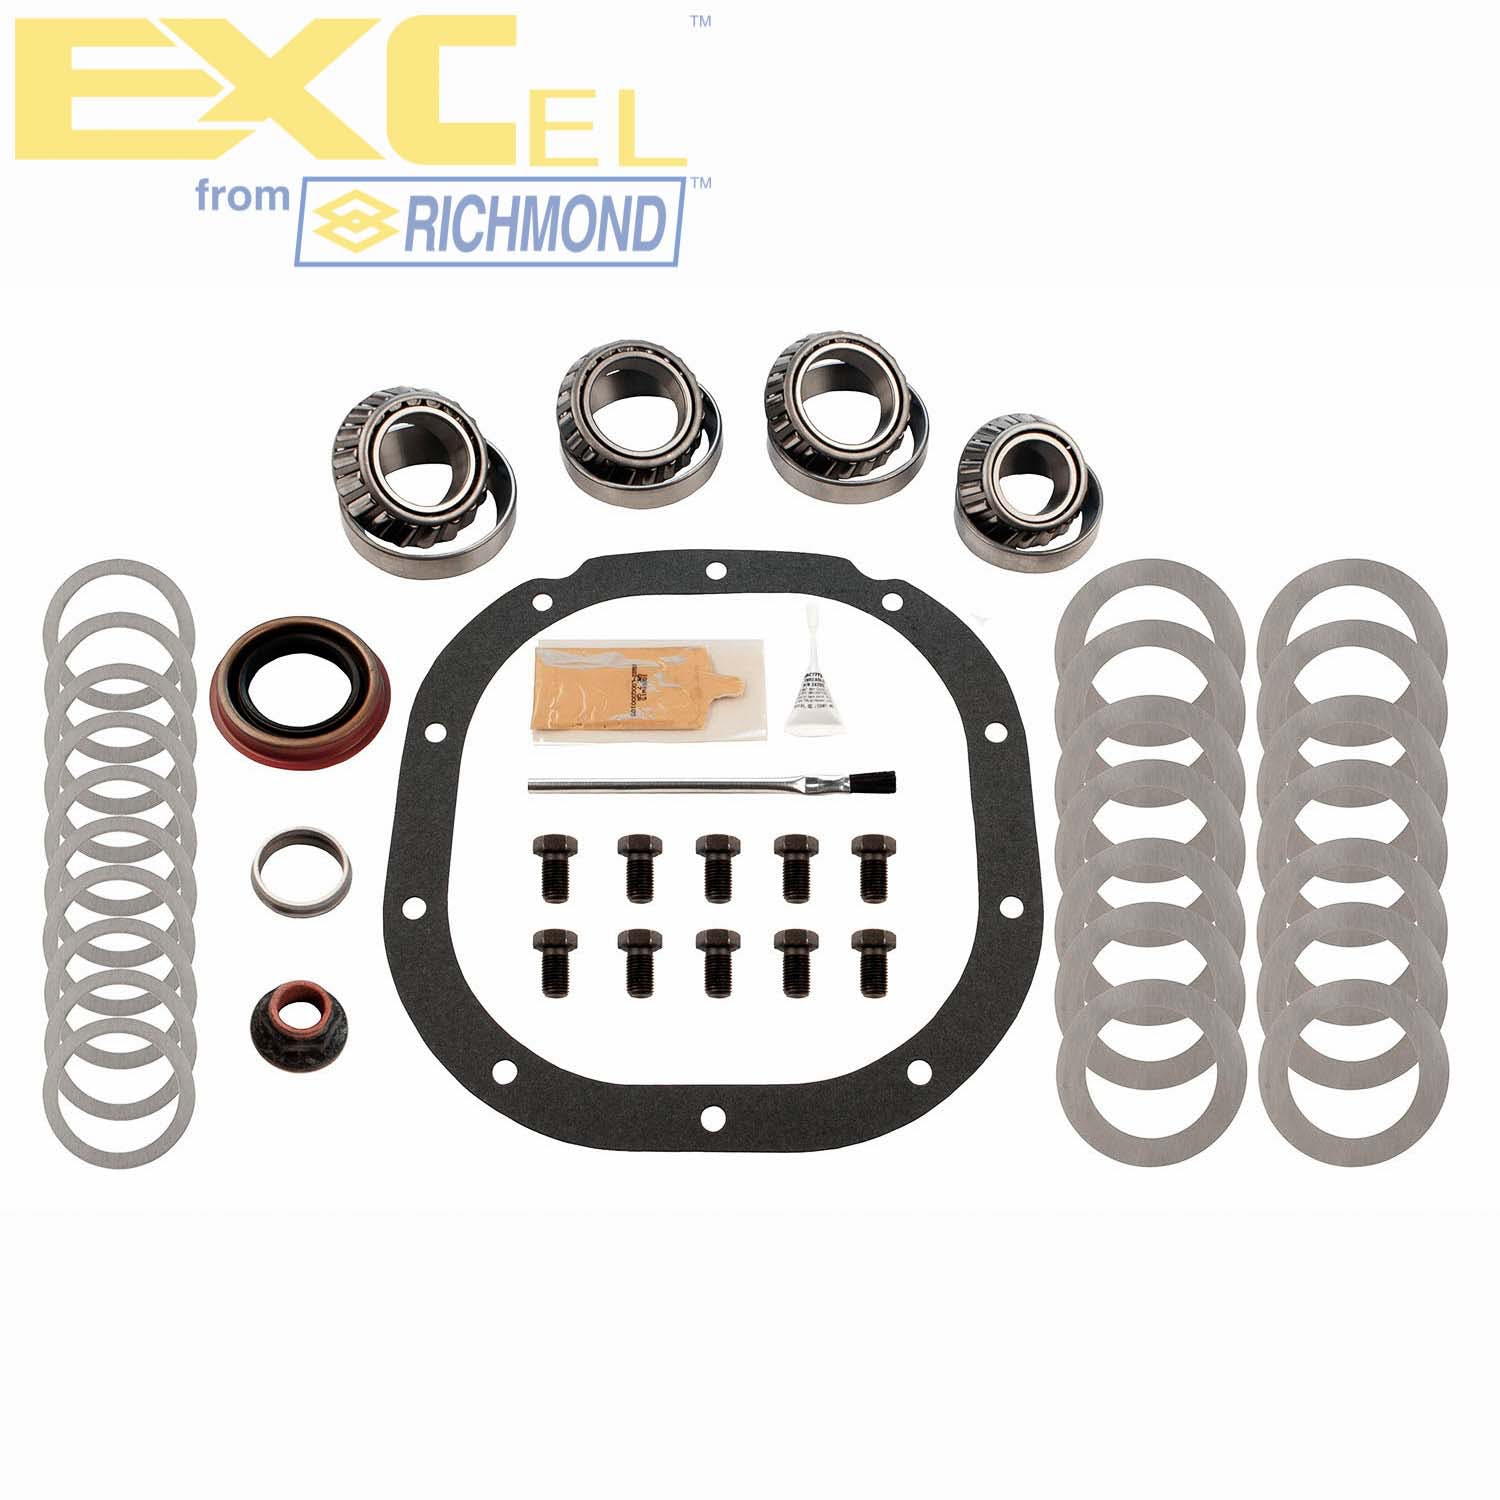 Excel XL-1043-1 Differential Bearing Kit